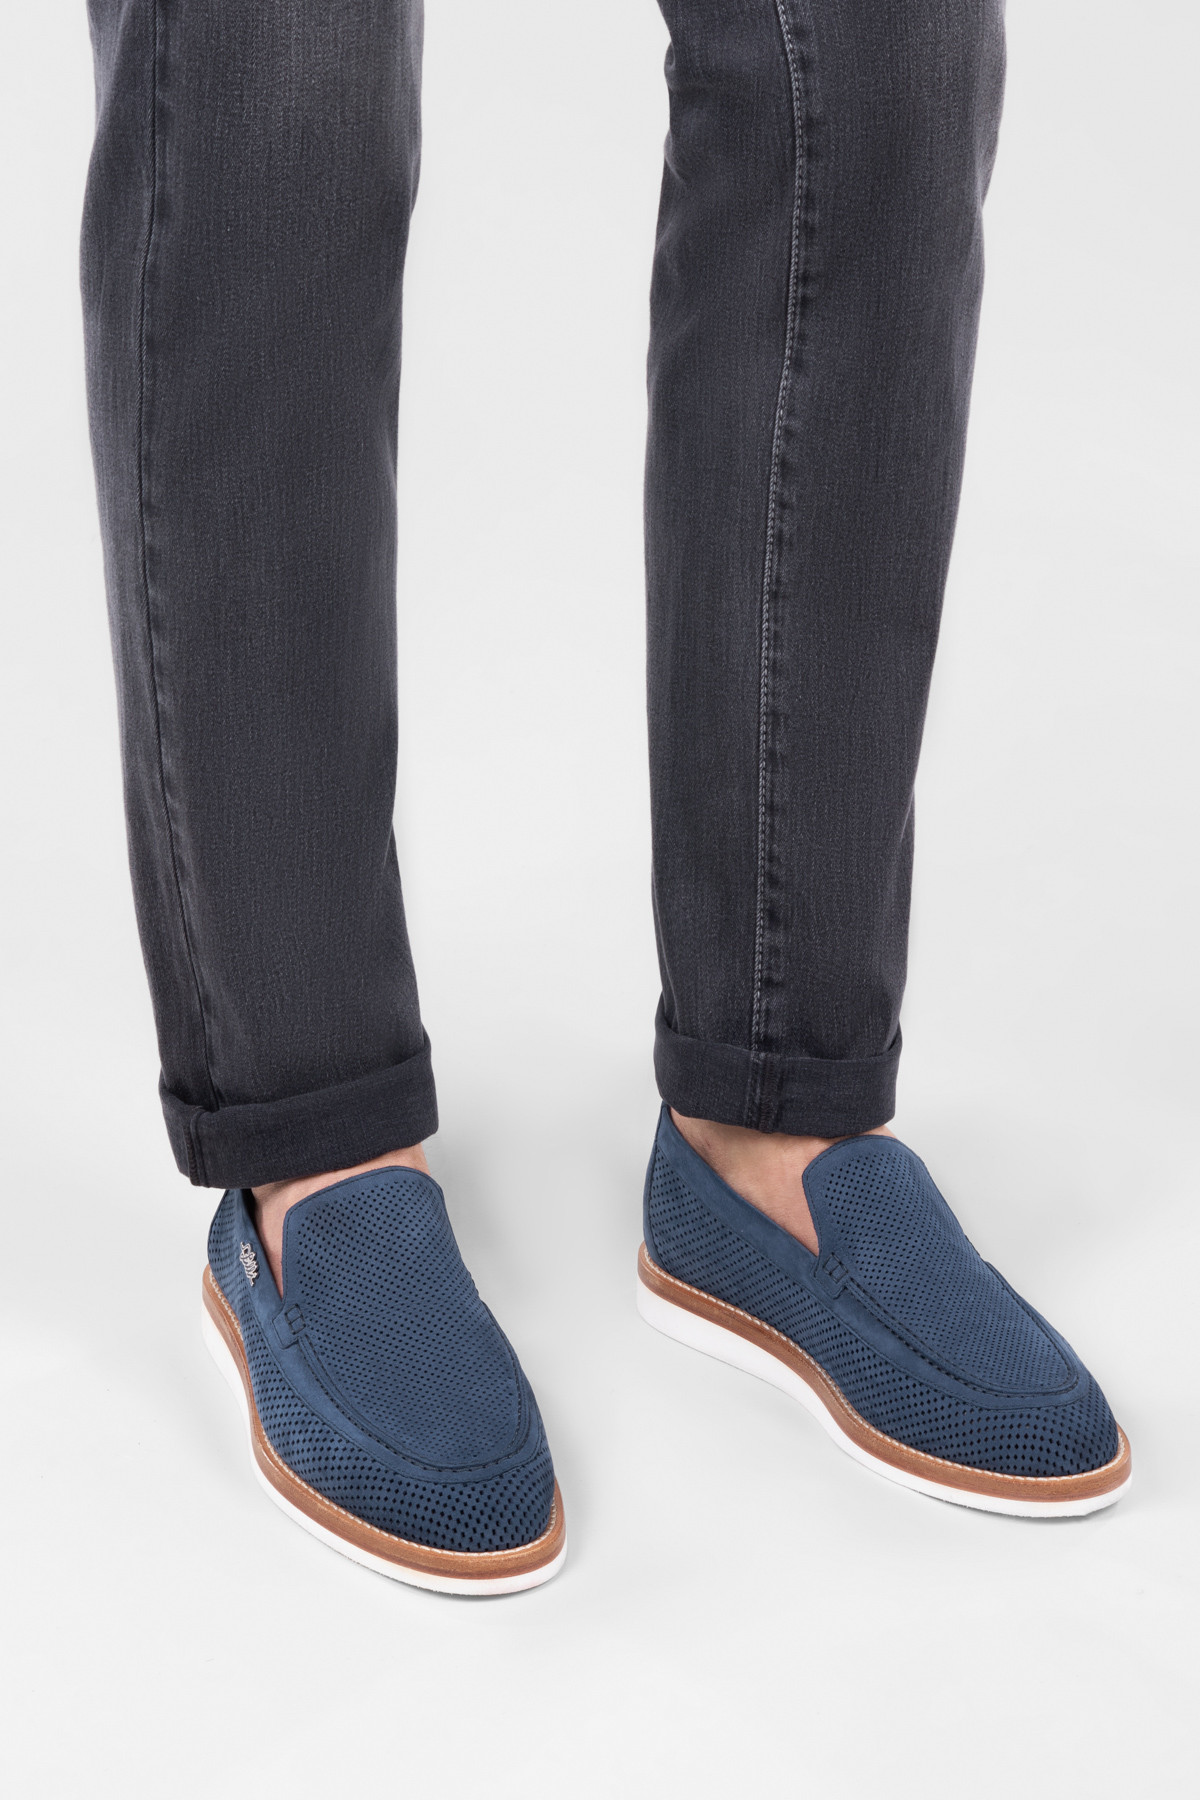 Denim blue loafers in perforated suede calfskin